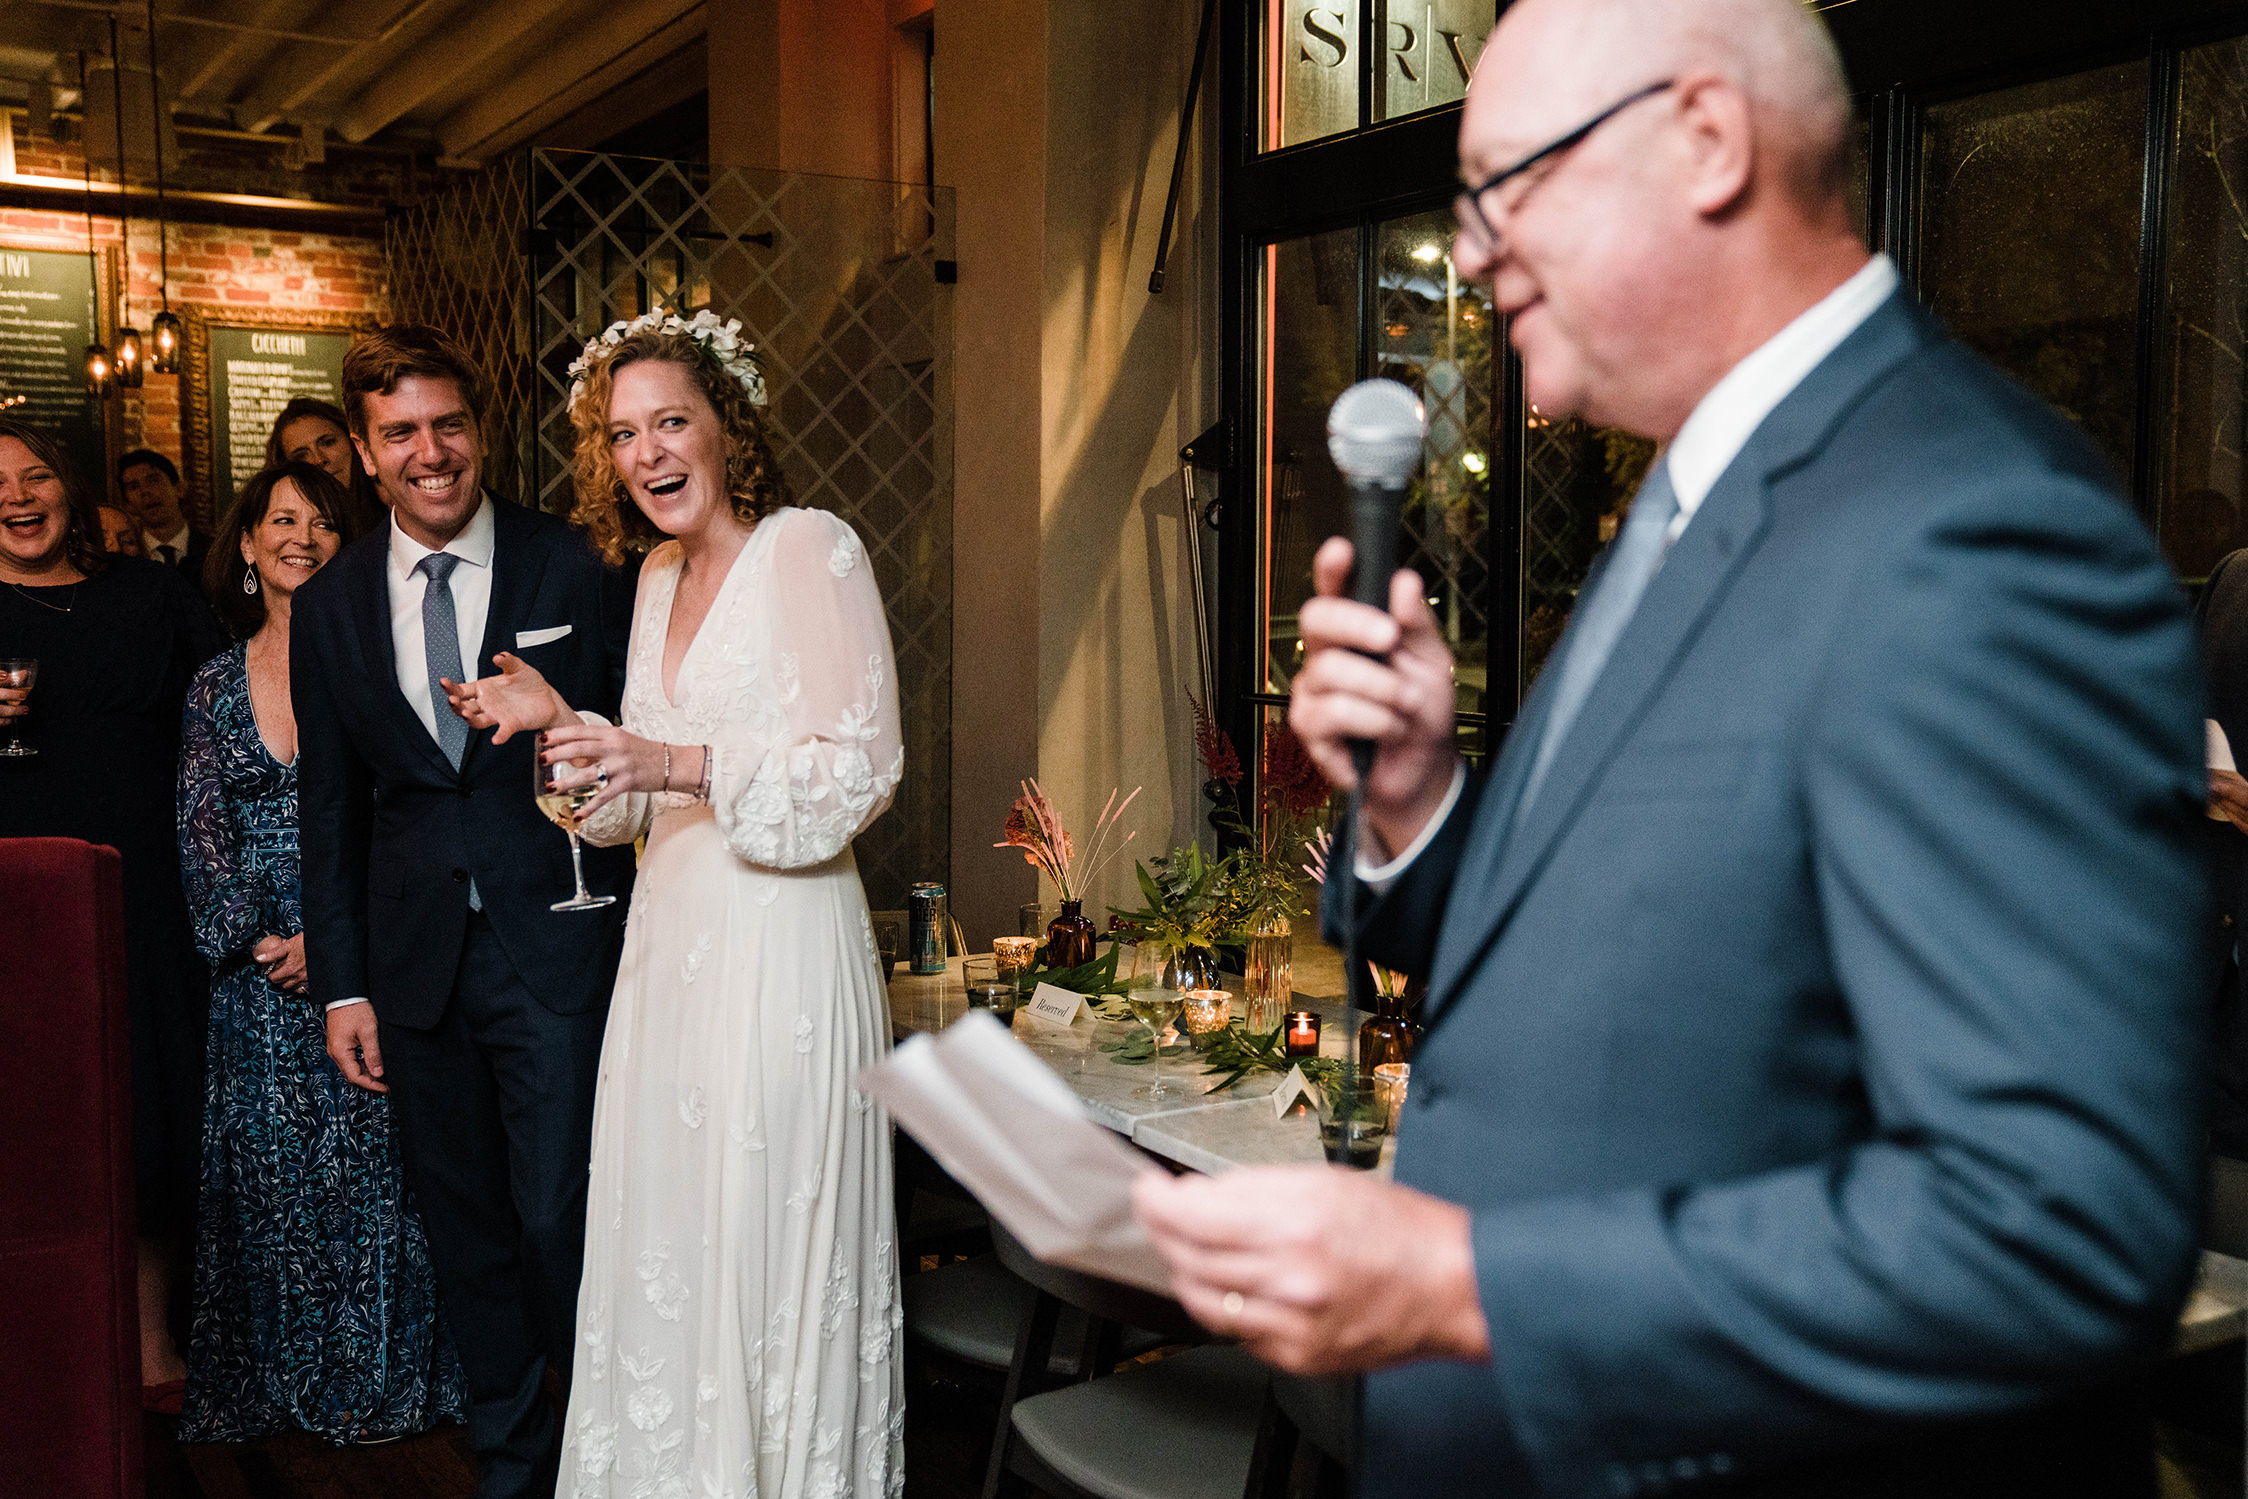 A documentary photograph featured in the best of wedding photography of 2019 showing a bride laughing during her father's toasts